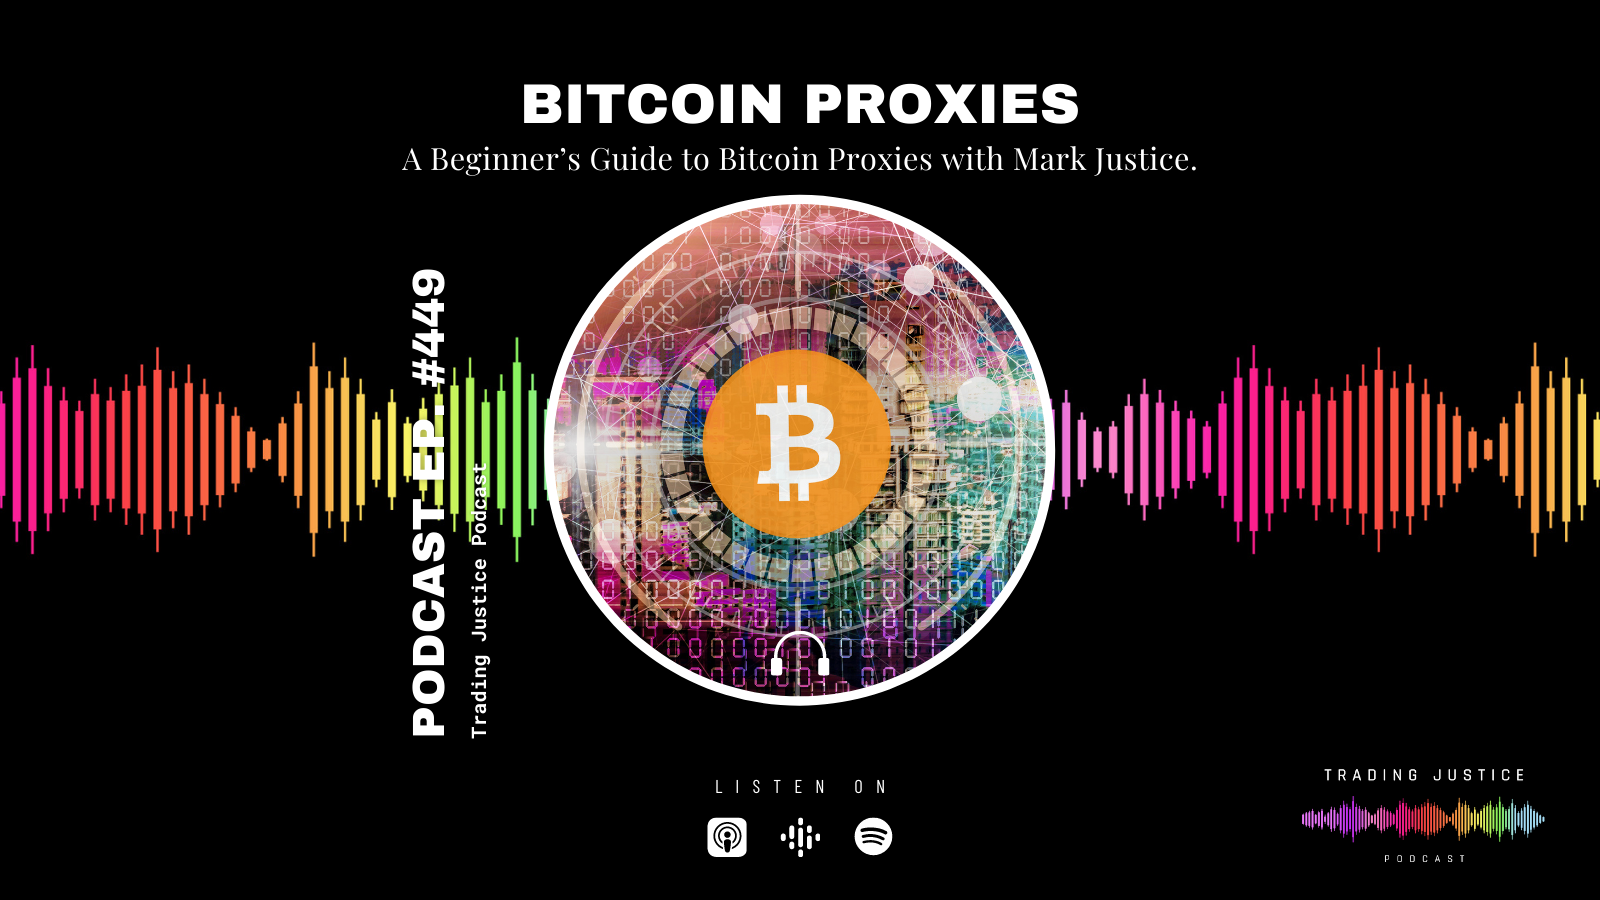 Trading Justice 449: Bitcoin Proxies